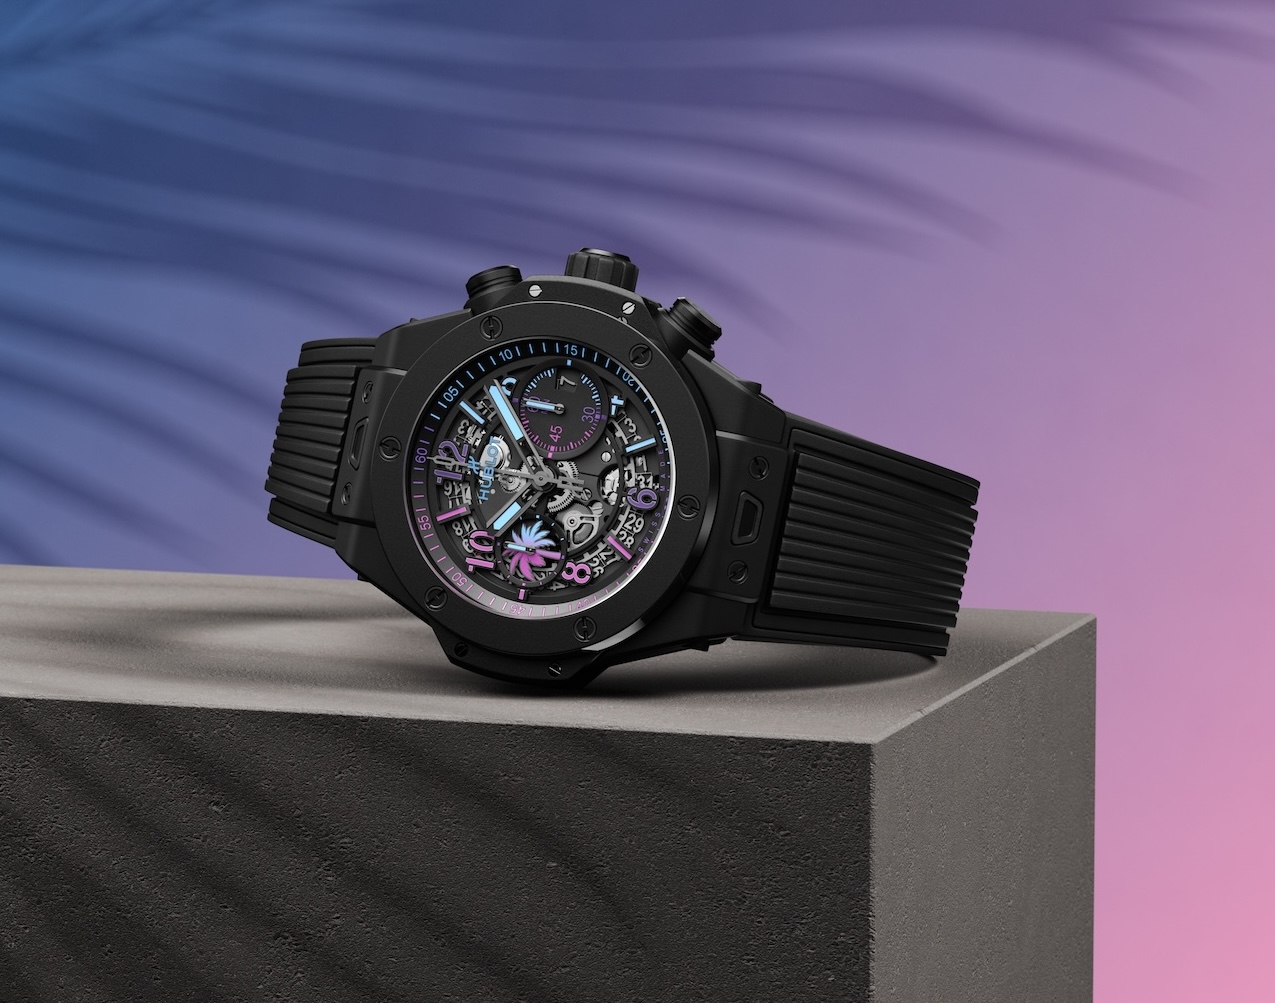 Miami, a unique and electric city, is a true muse for Hublot's latest creation – the Big Bang Unico Magic City.